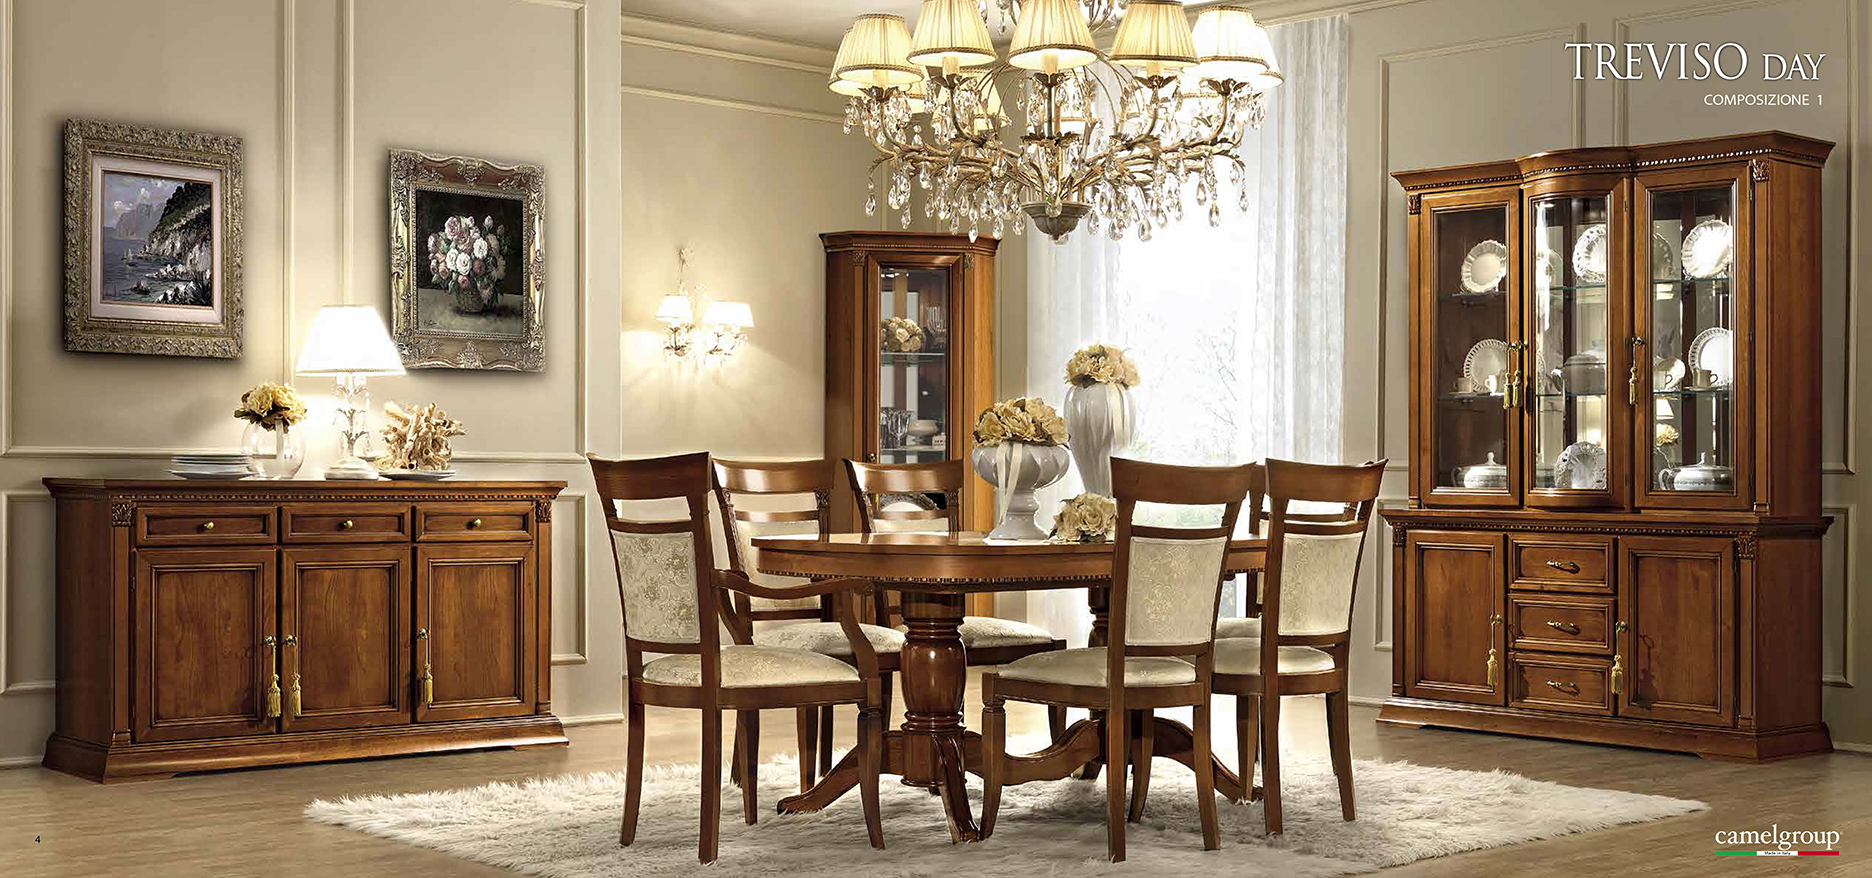 Dining Room Furniture Modern Dining Room Sets Treviso Cherry Day